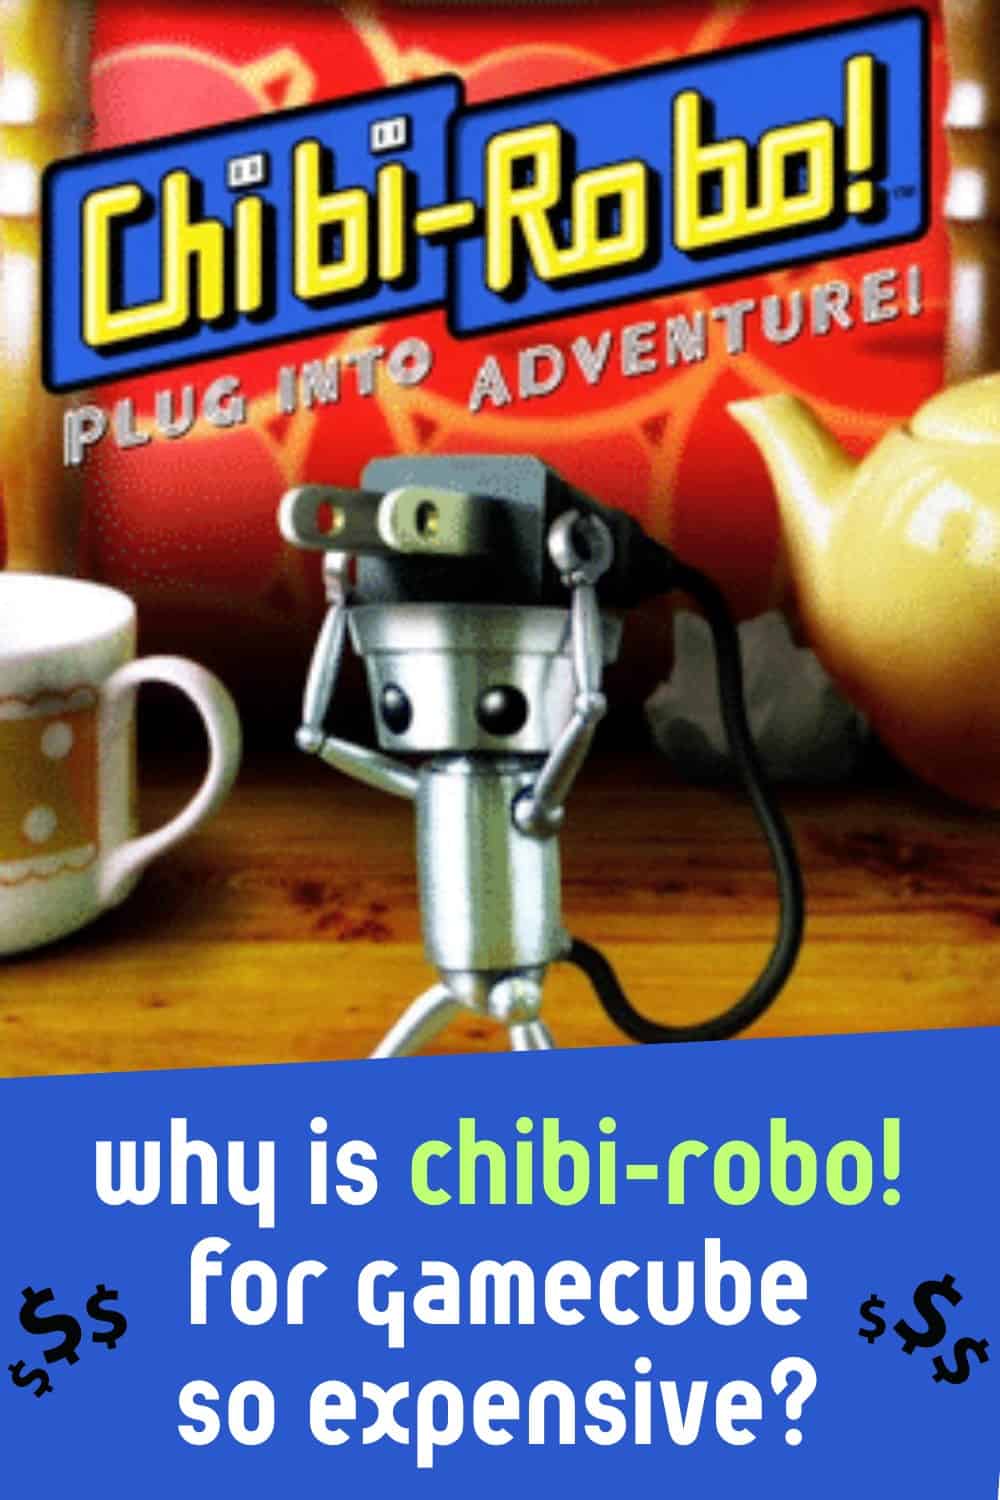 Chibi Robo is so expensive because it is a good Gamecube game